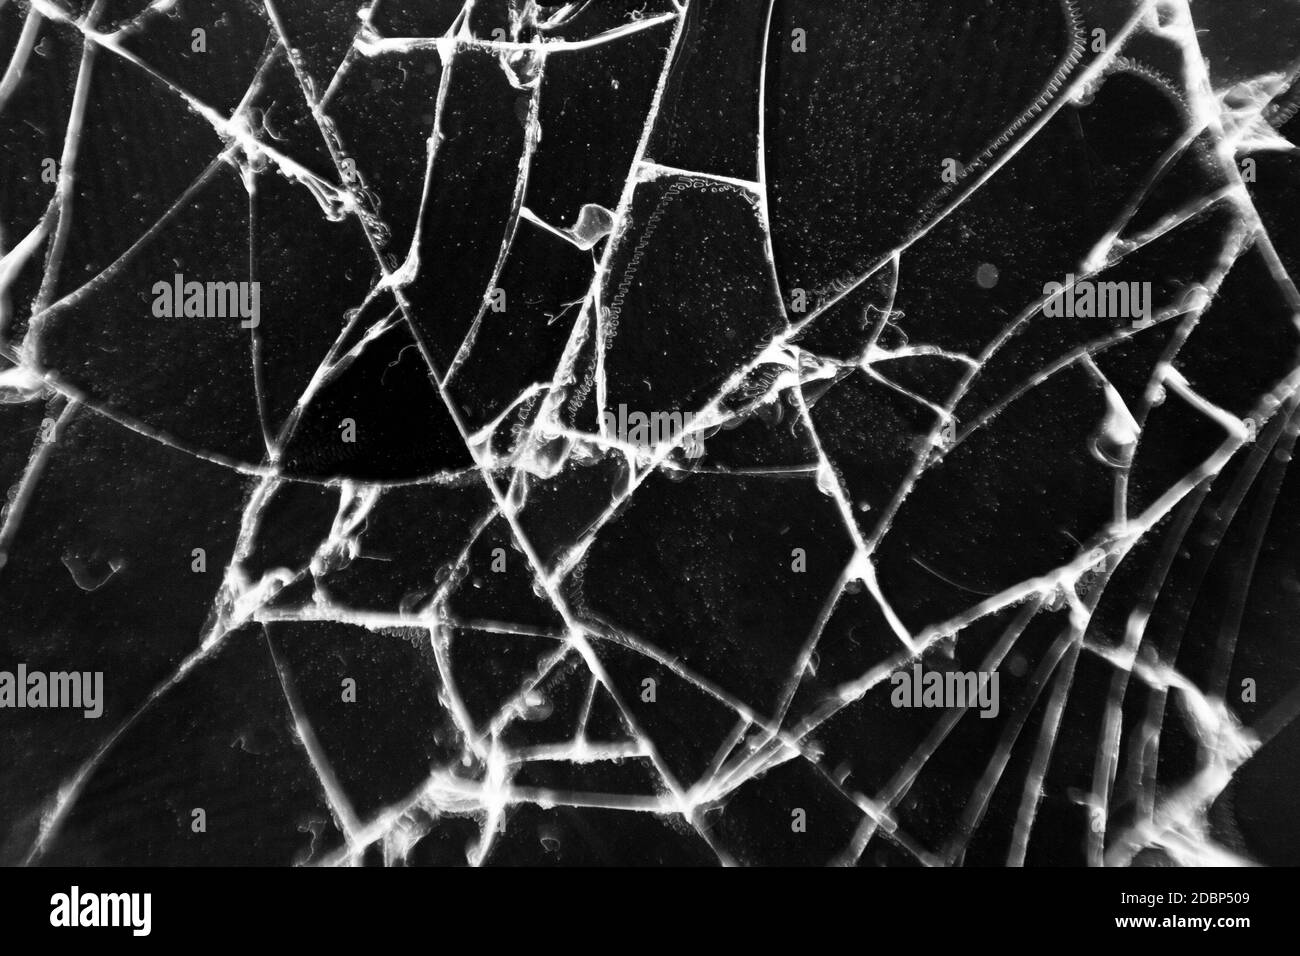 Broken glass texture. Abstract of cracked phone screen. Smartphone broken cracked glass texture of display screen. Abstract background Stock Photo